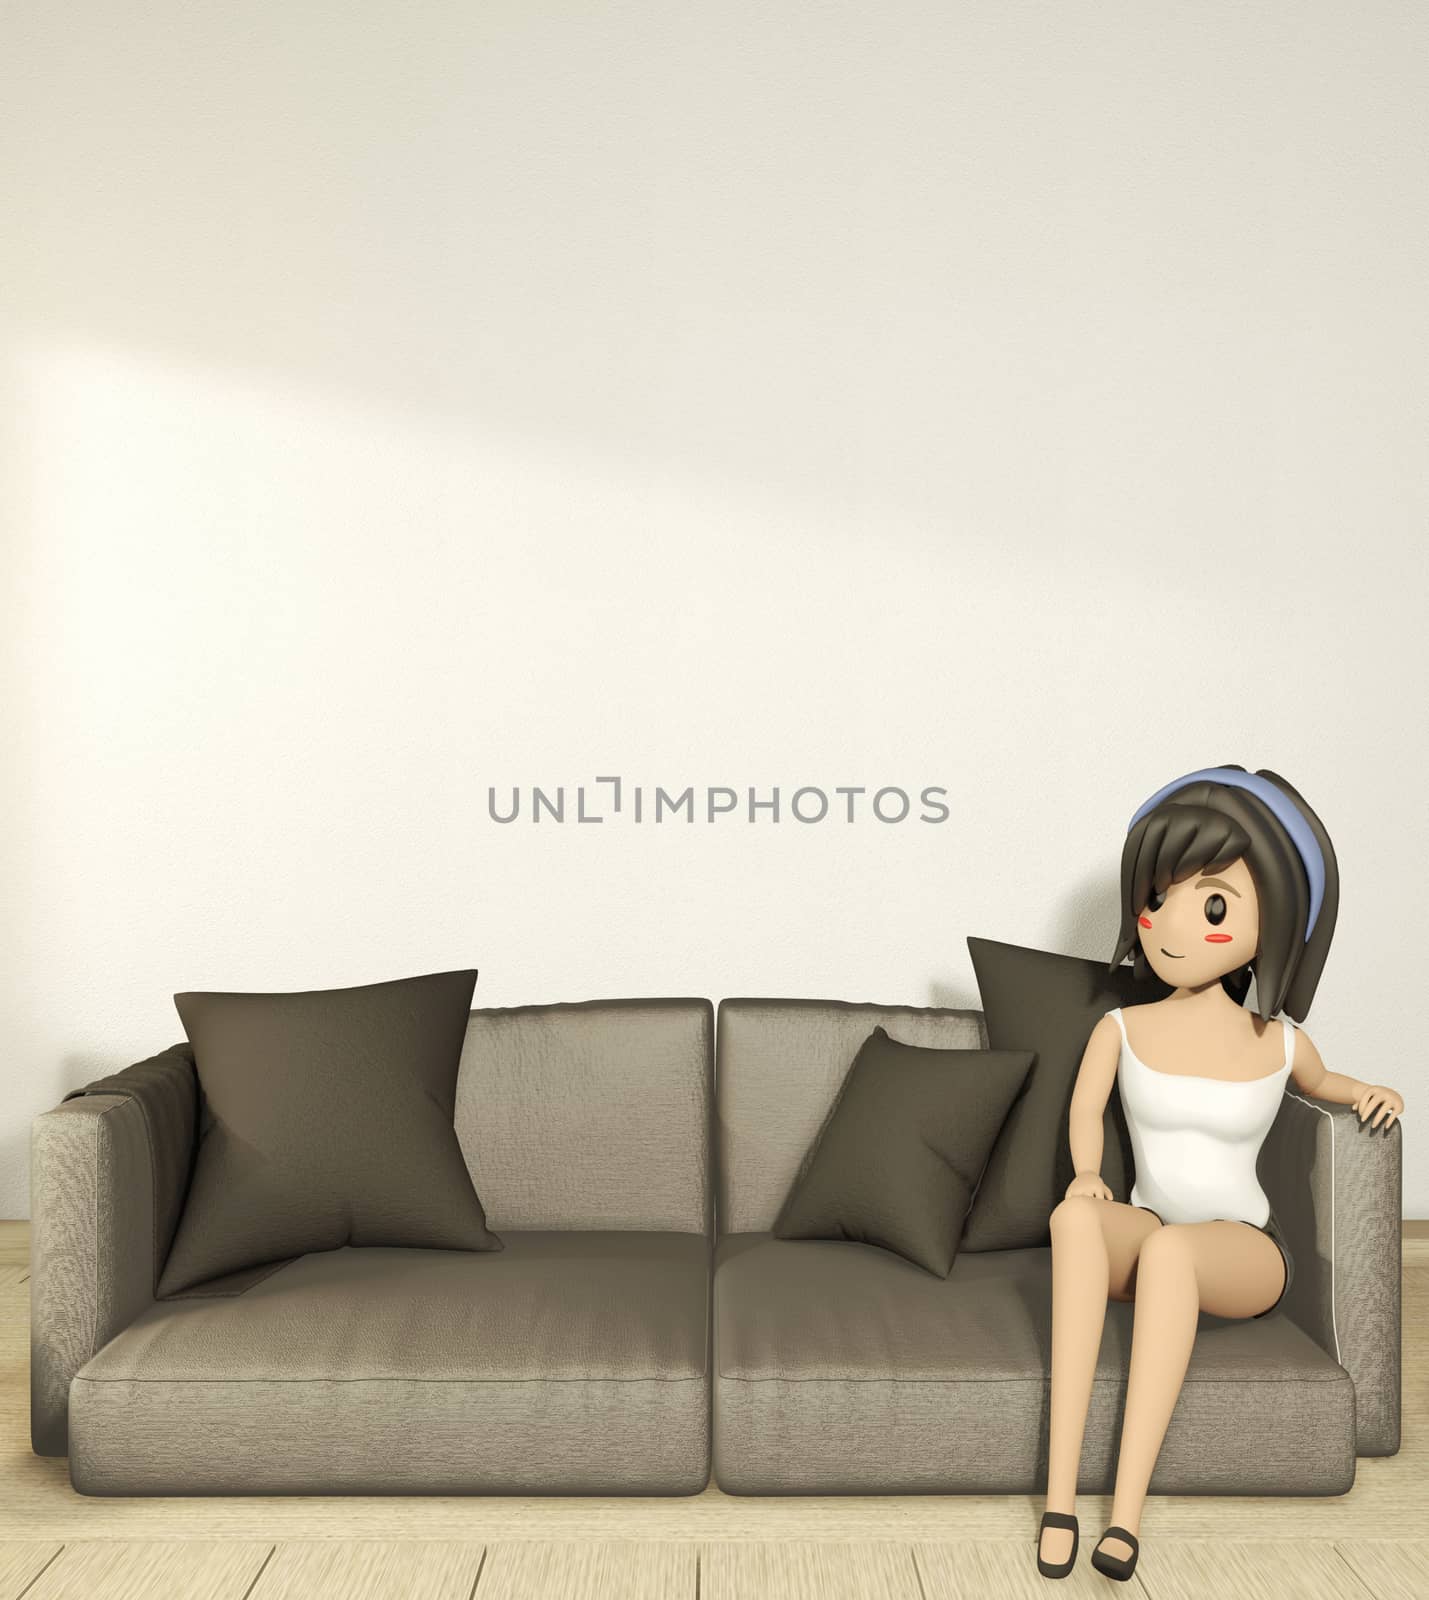 Cartoon girl on the sofa armchair with room interior japanese style. 3D rendering